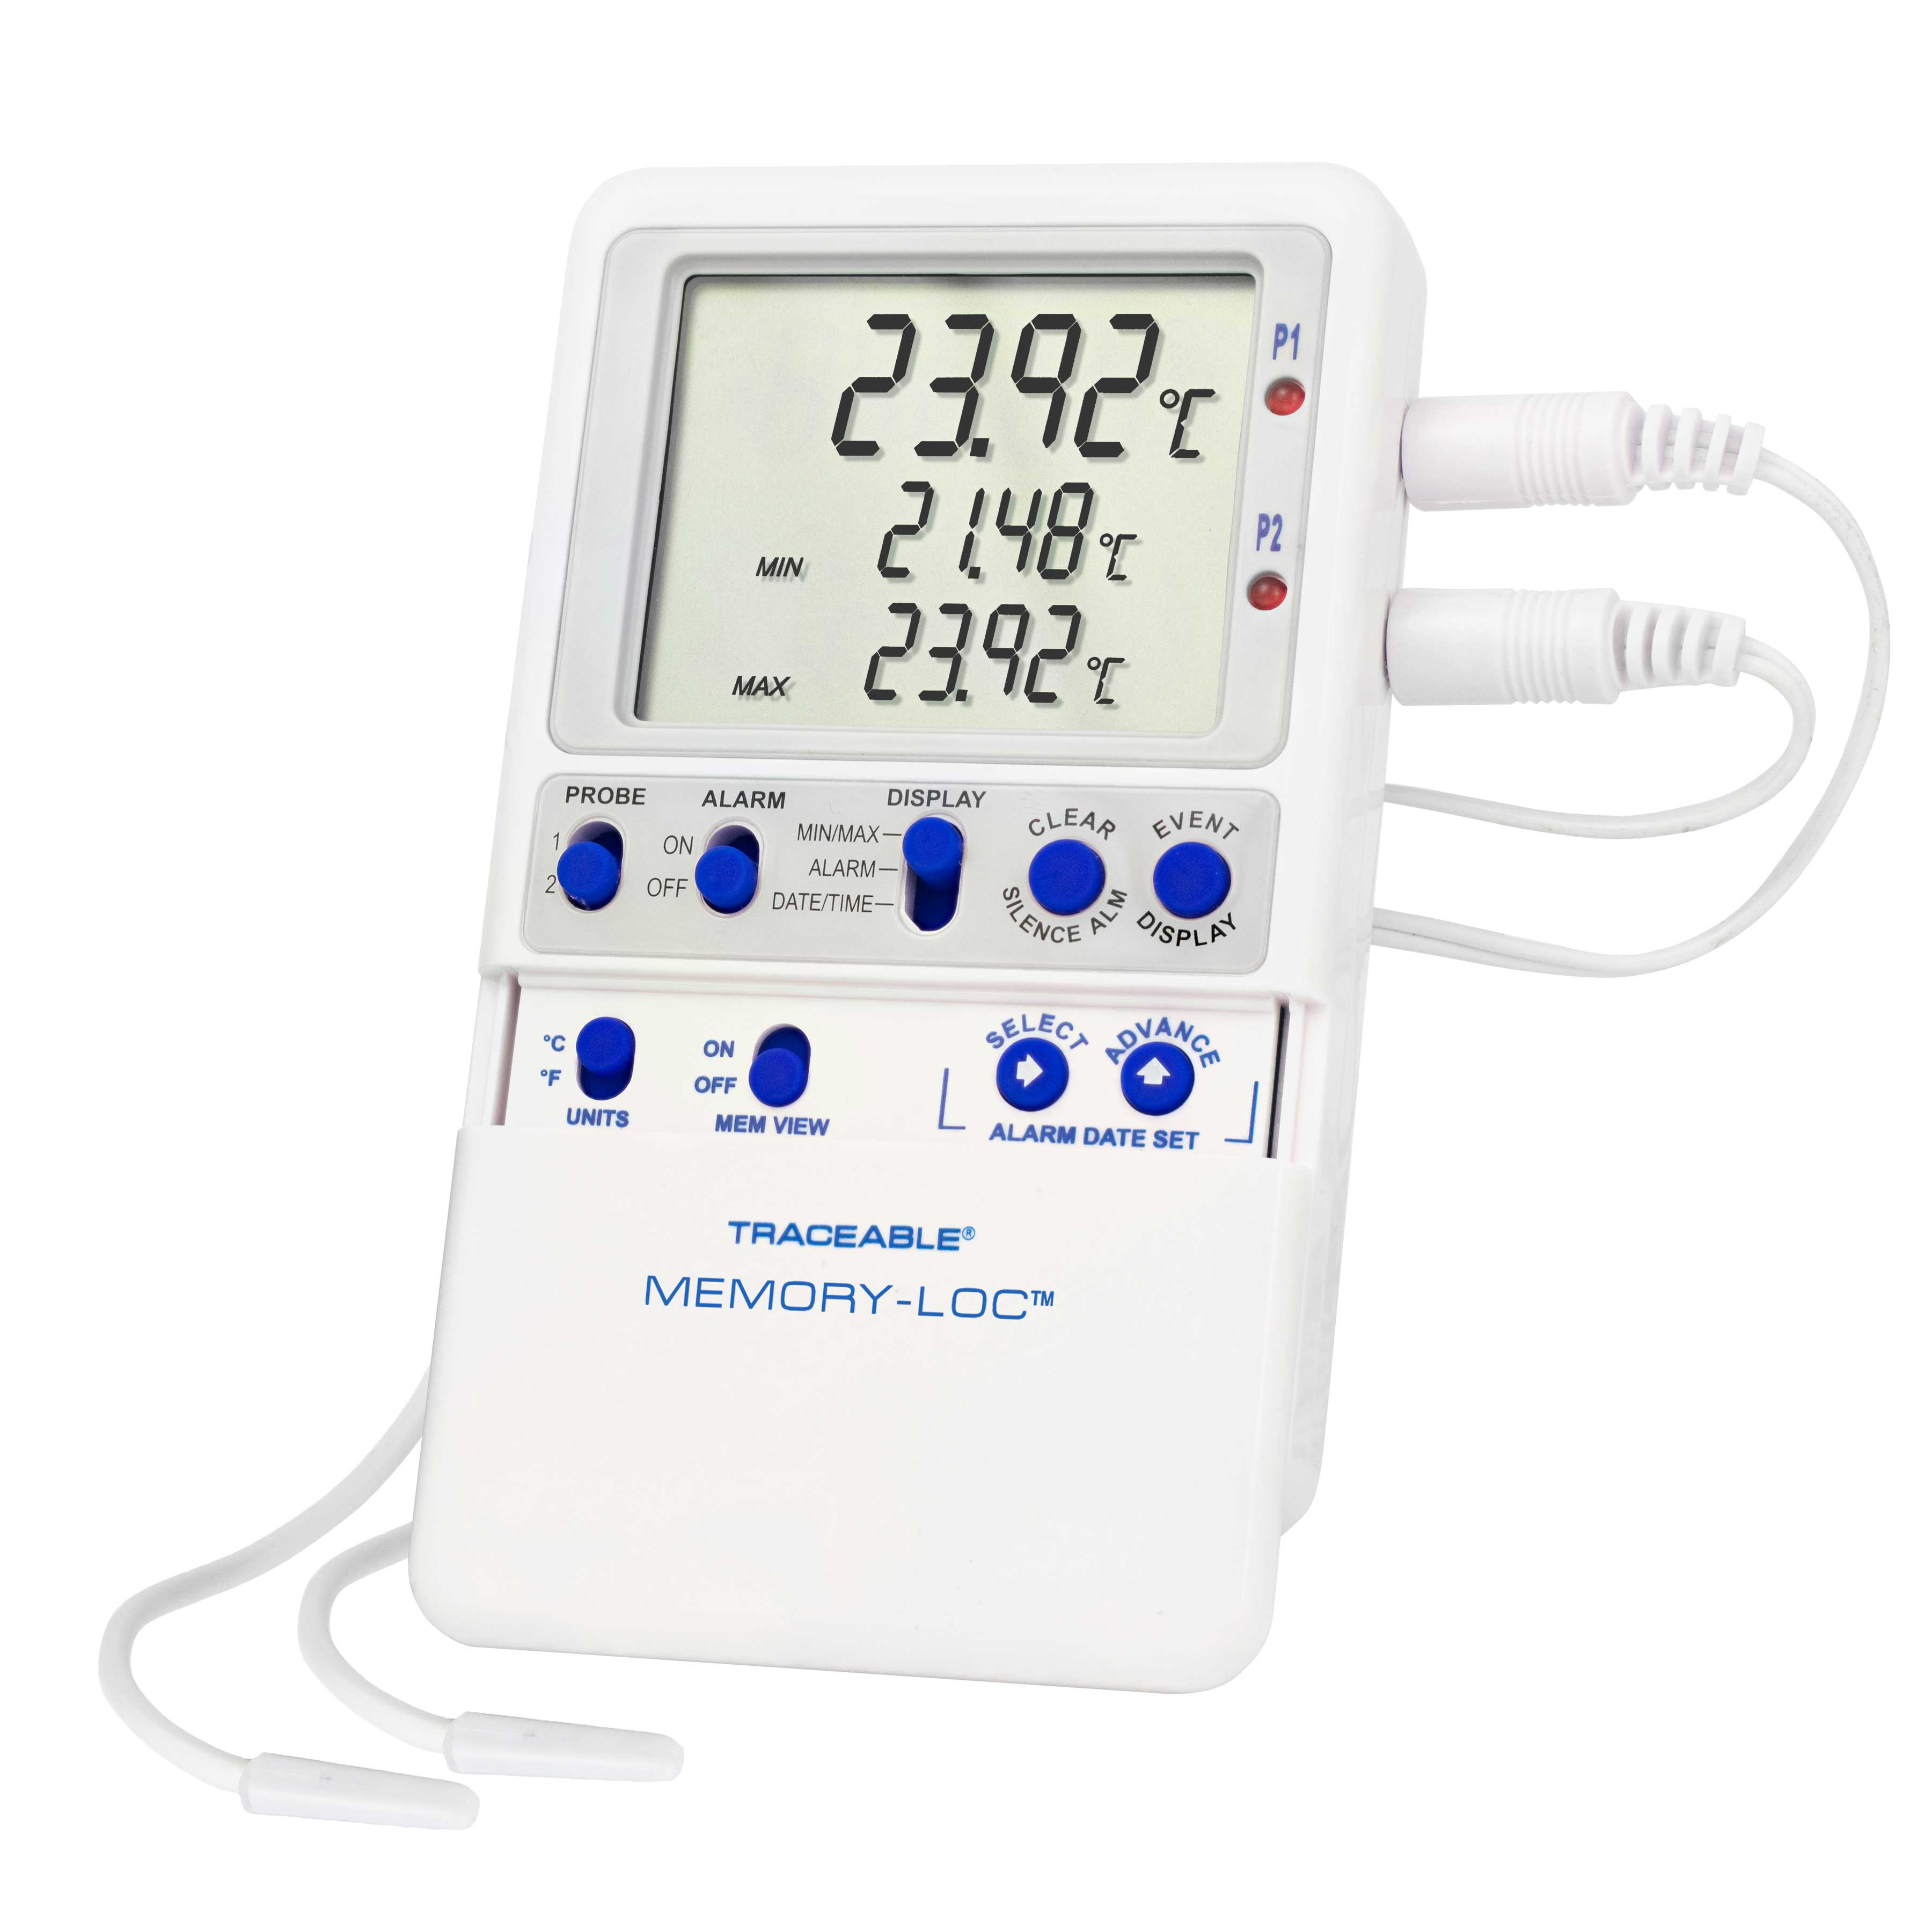 Memory-Loc datalogging digital thermometer. TRACEABLE. Range: –50.00 to 70.00°C. Accuracy: ±0.25°C. Resolution: 0.01°C. Probes: 2 BulletTM probes. Application: Refrigerators and Freezers